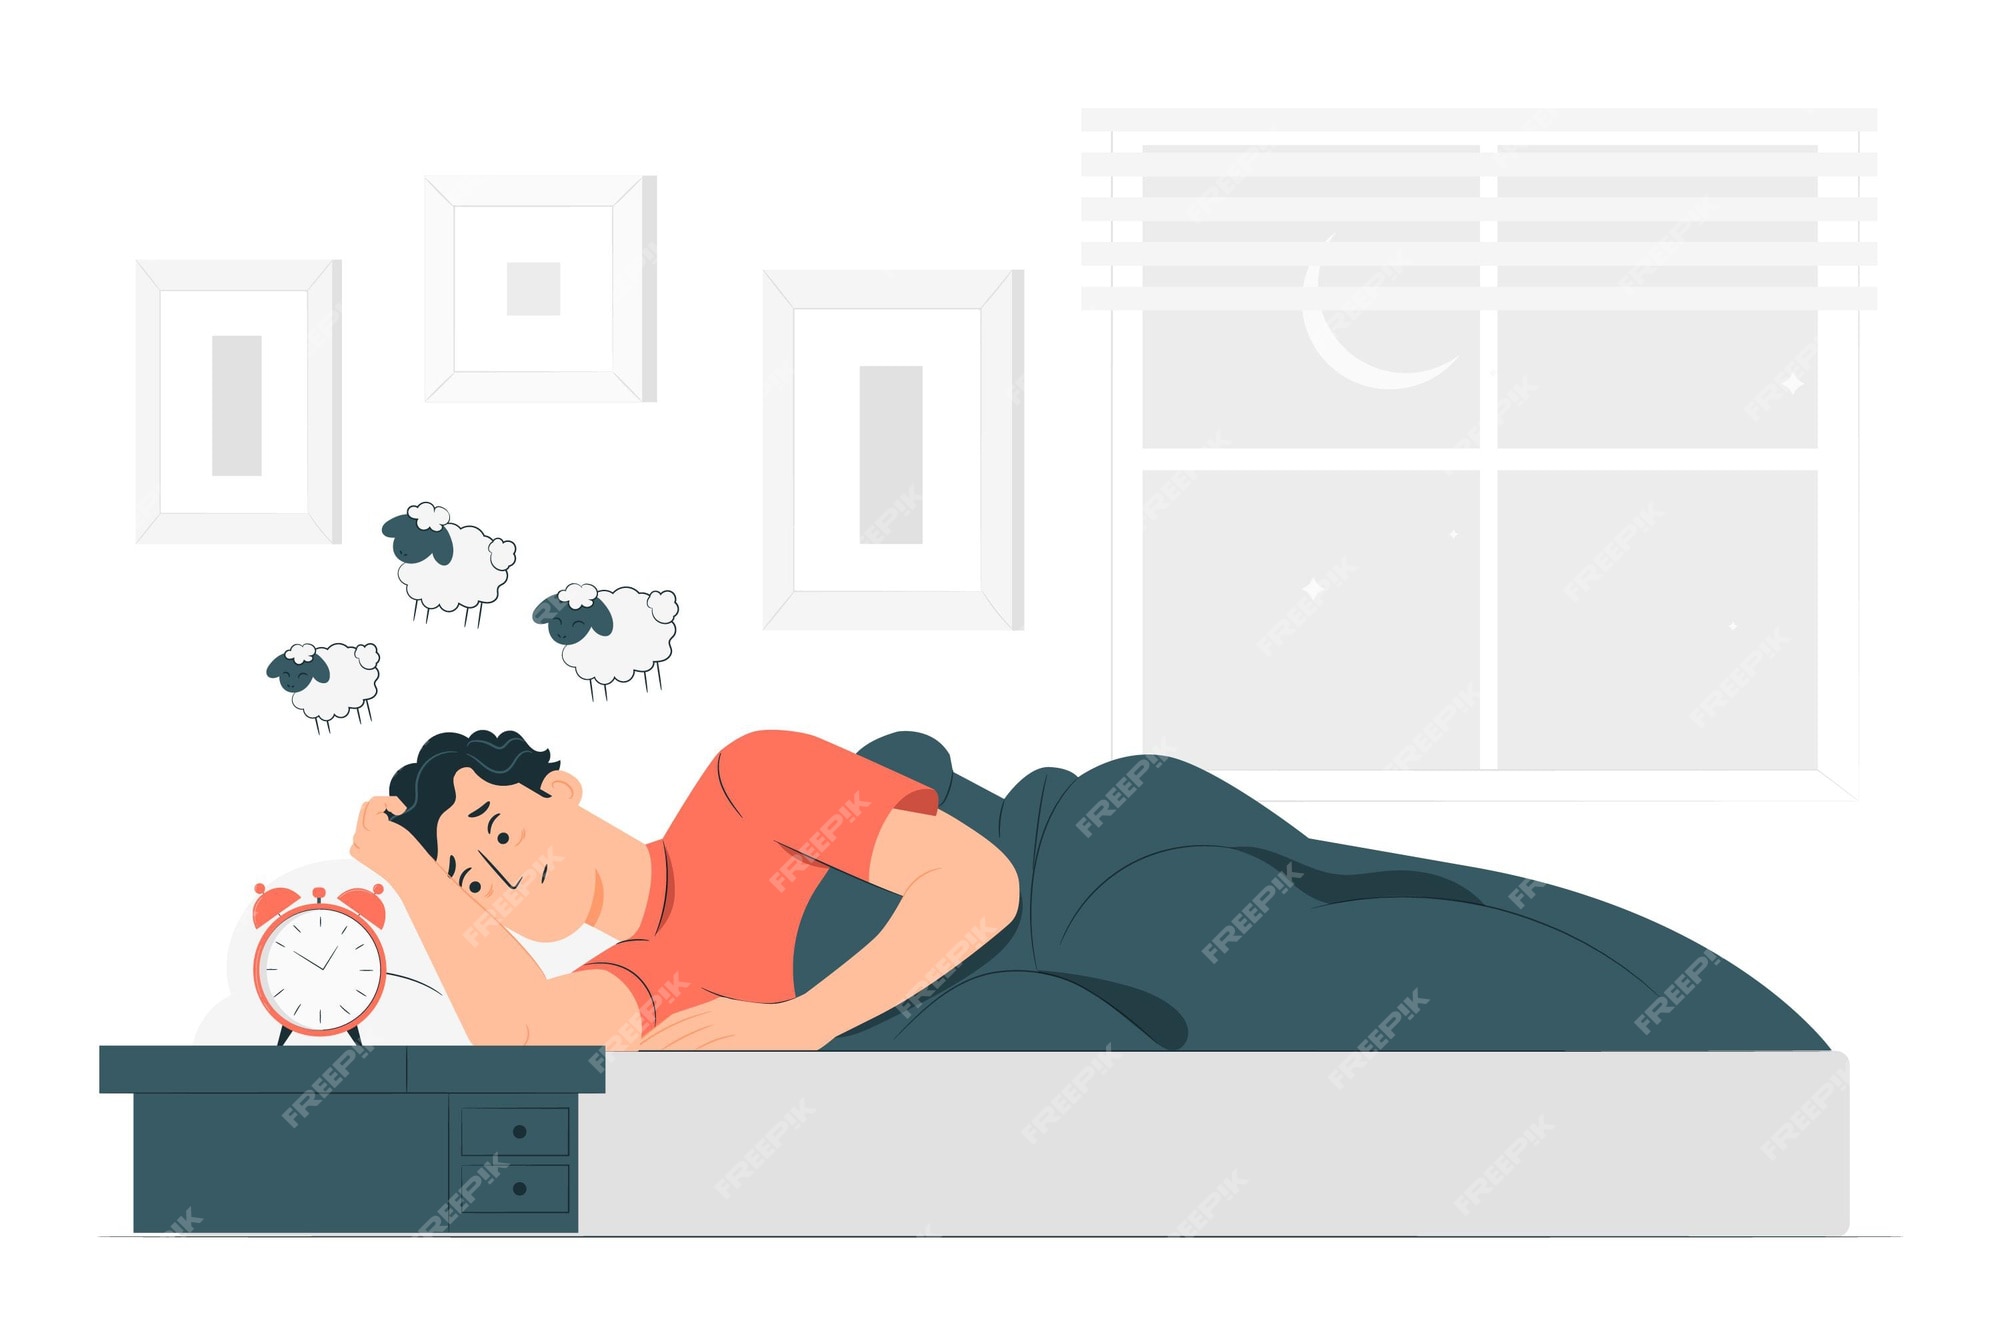 Sleeping People Images | Free Vectors, Stock Photos & PSD